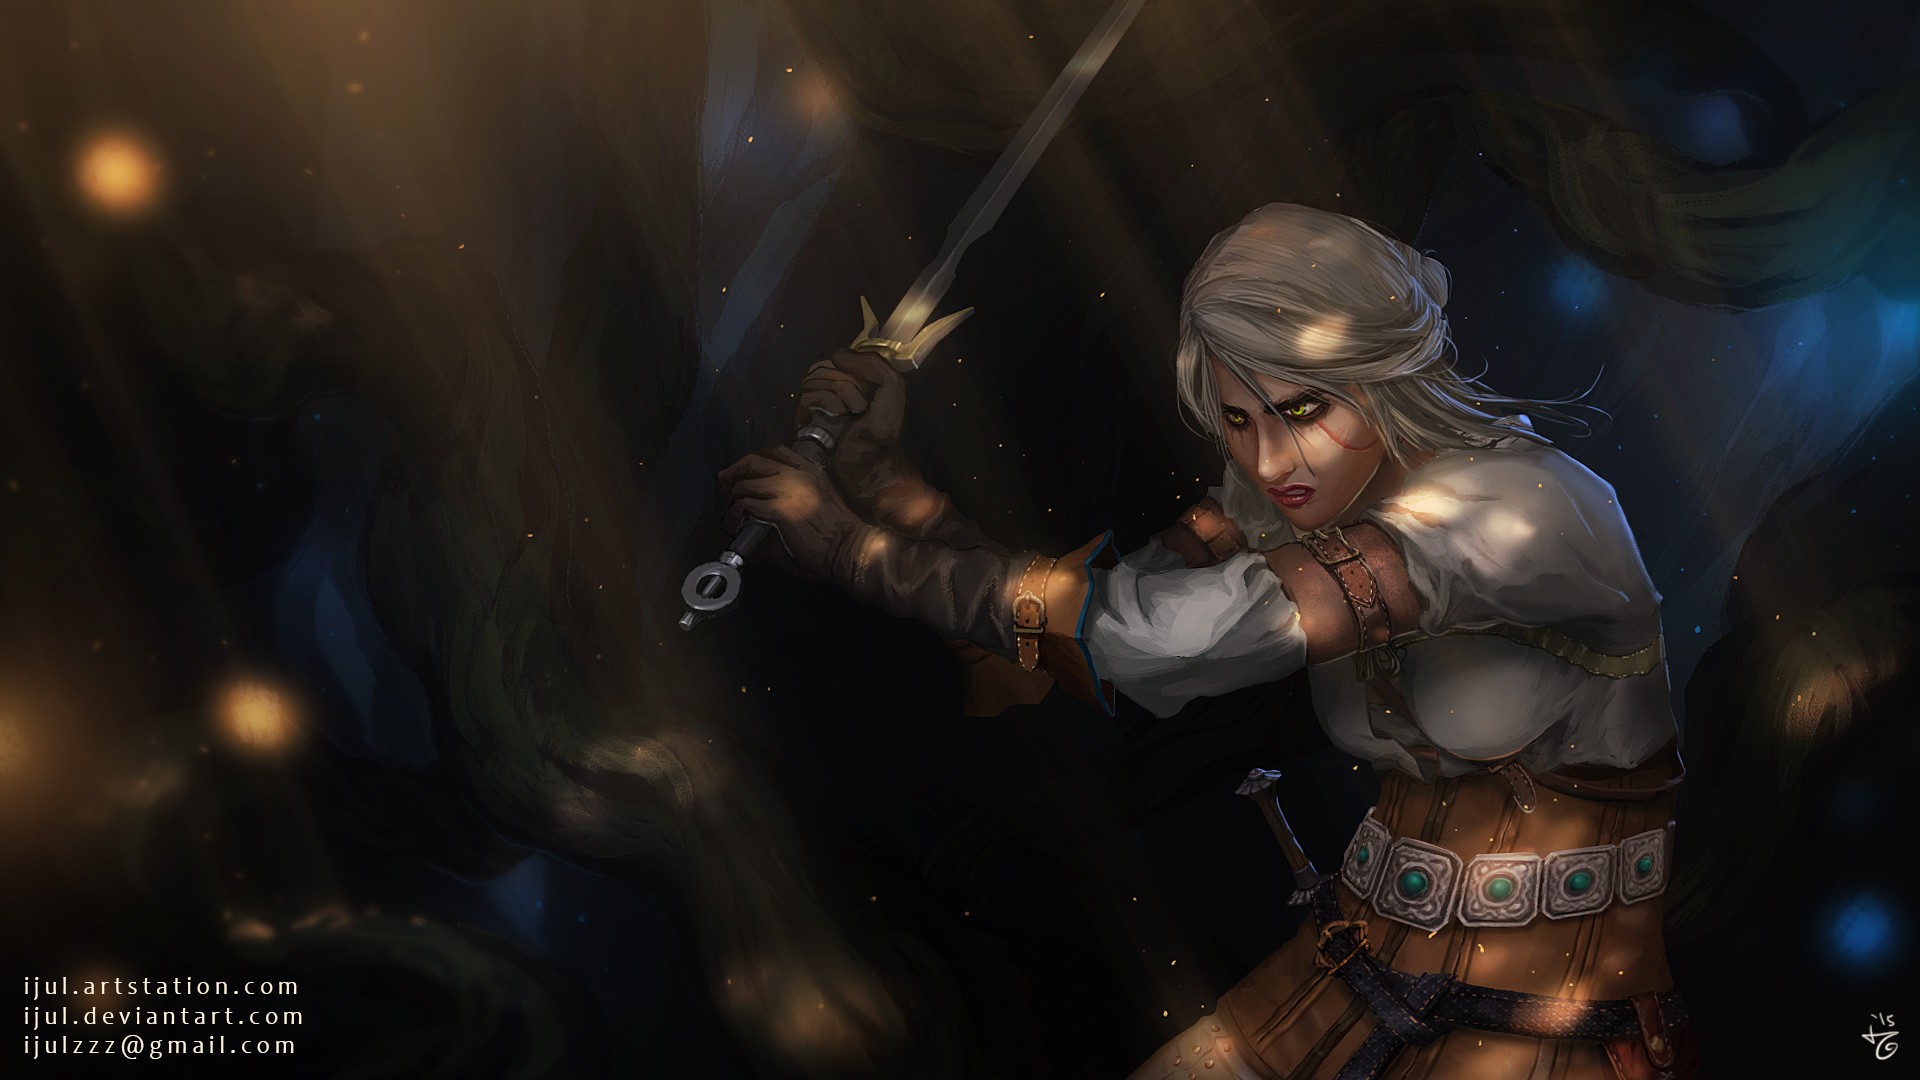 General 1920x1080 The Witcher The Witcher 3: Wild Hunt video games Cirilla Fiona Elen Riannon fantasy girl video game girls DeviantArt sword weapon women with swords RPG PC gaming red lipstick fantasy art